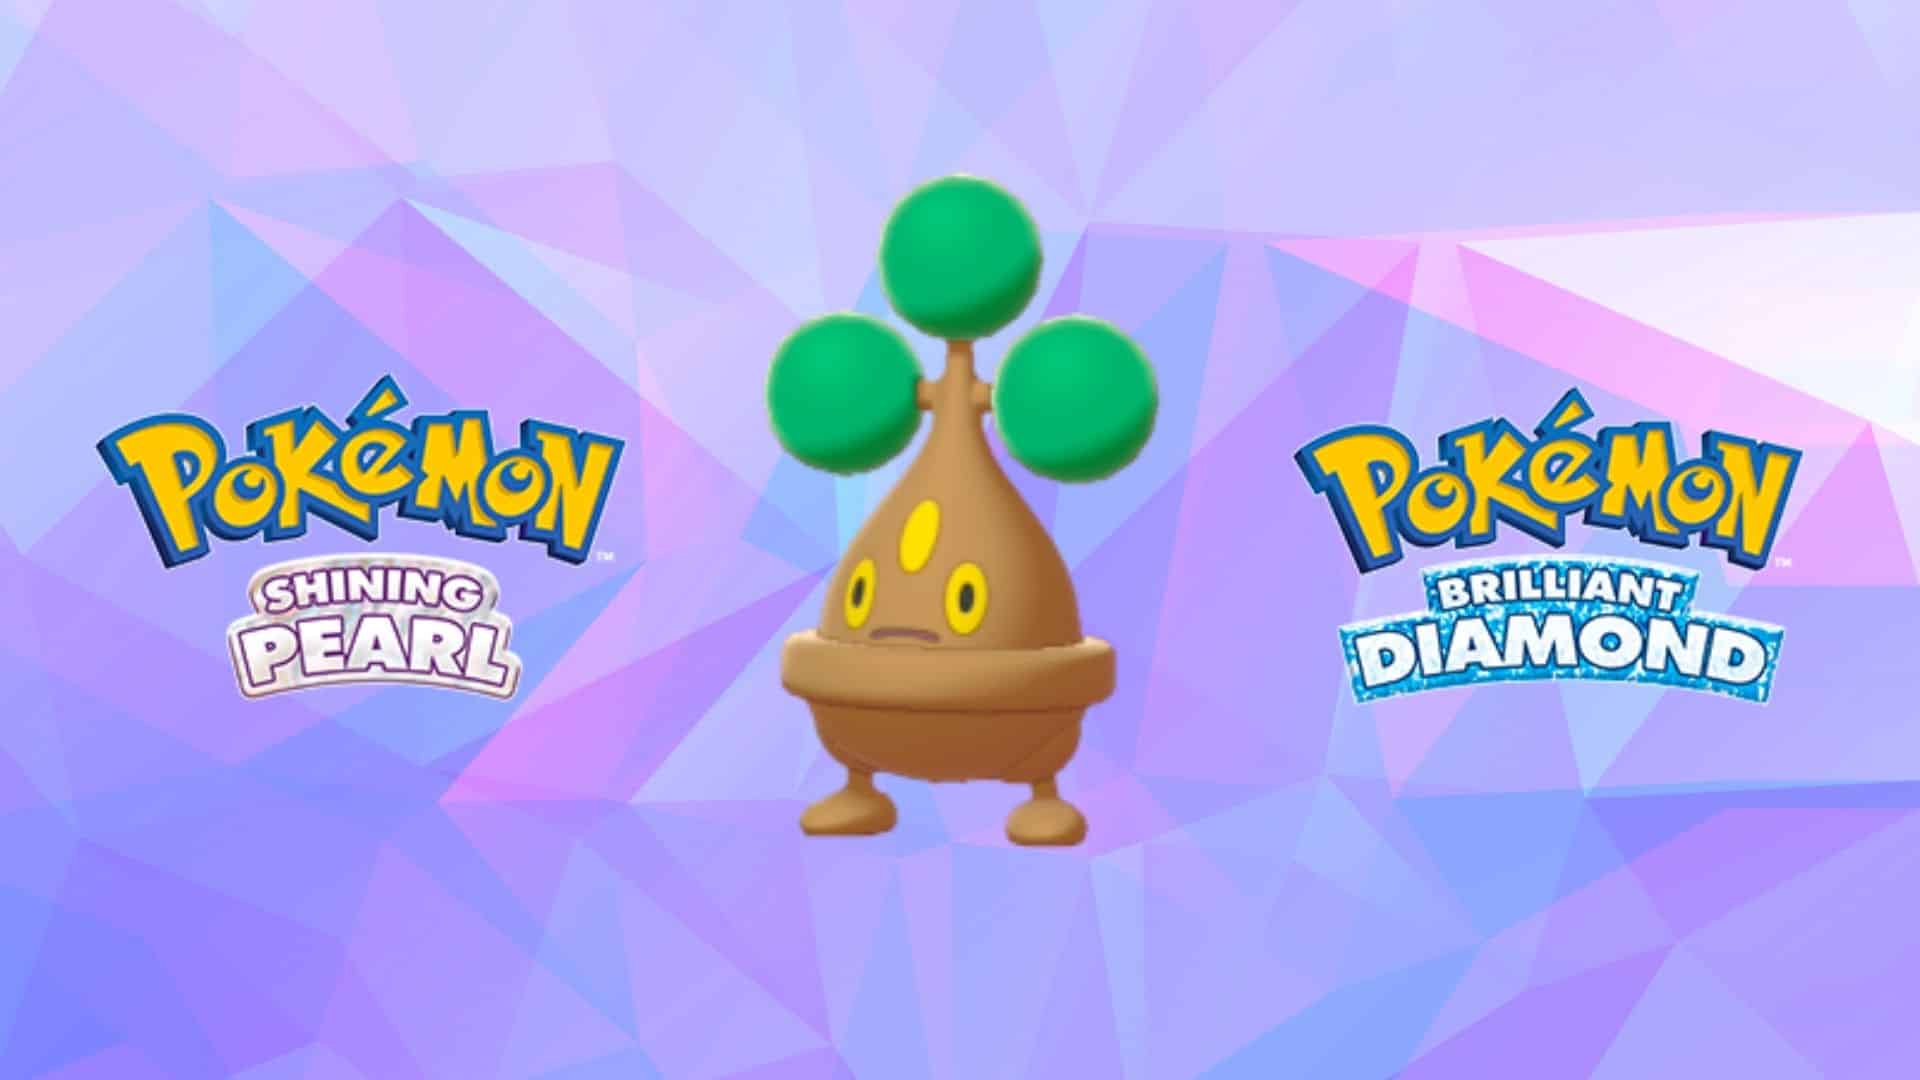 Every Trophy Garden exclusive Pokemon in Brilliant Diamond and Shining Pearl